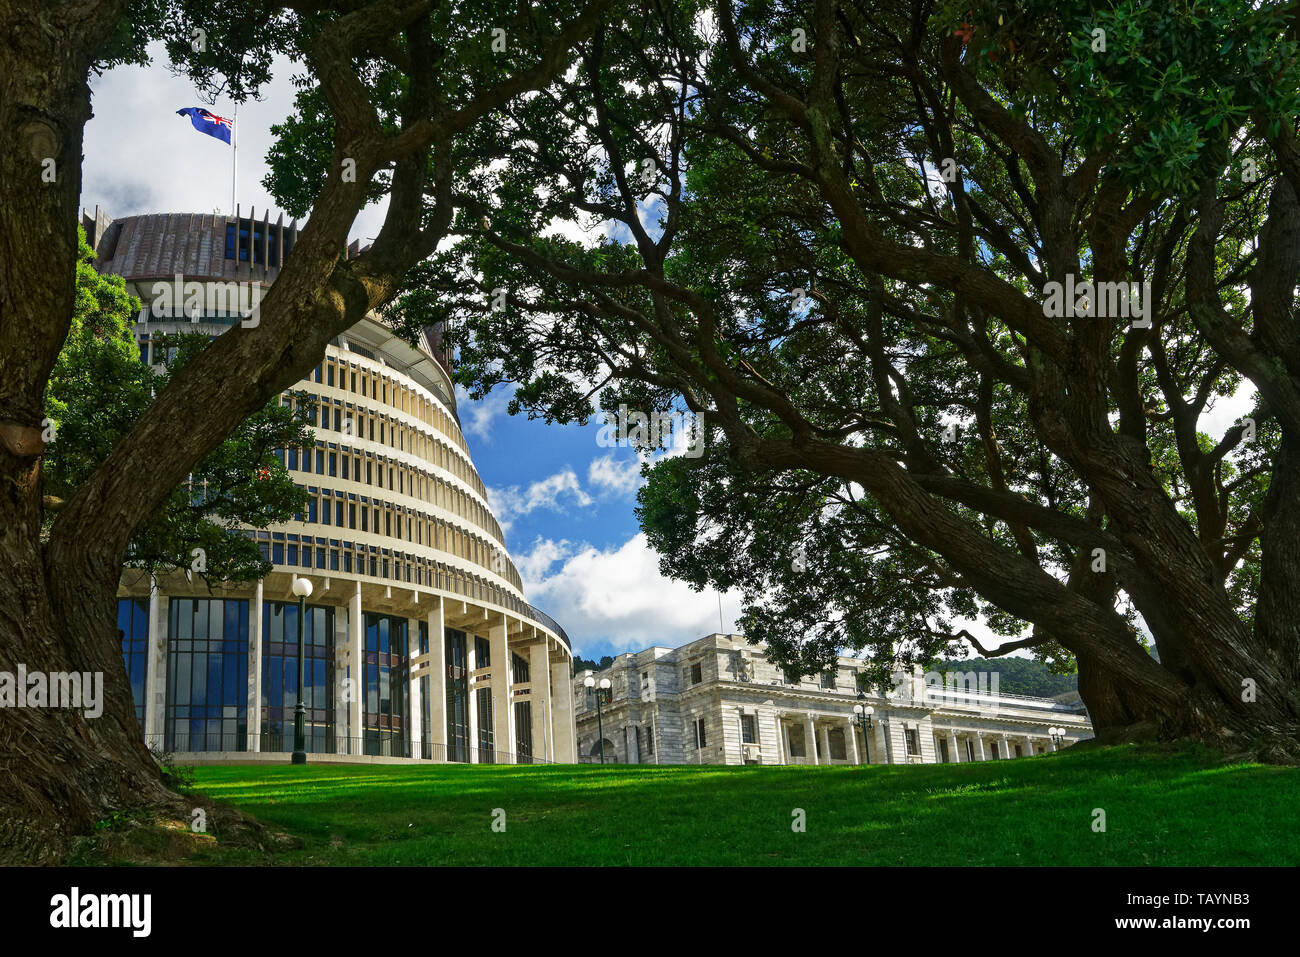 The Beehive - New Zealand parliament building with flag flying on a sunny day viewed through trees Stock Photo